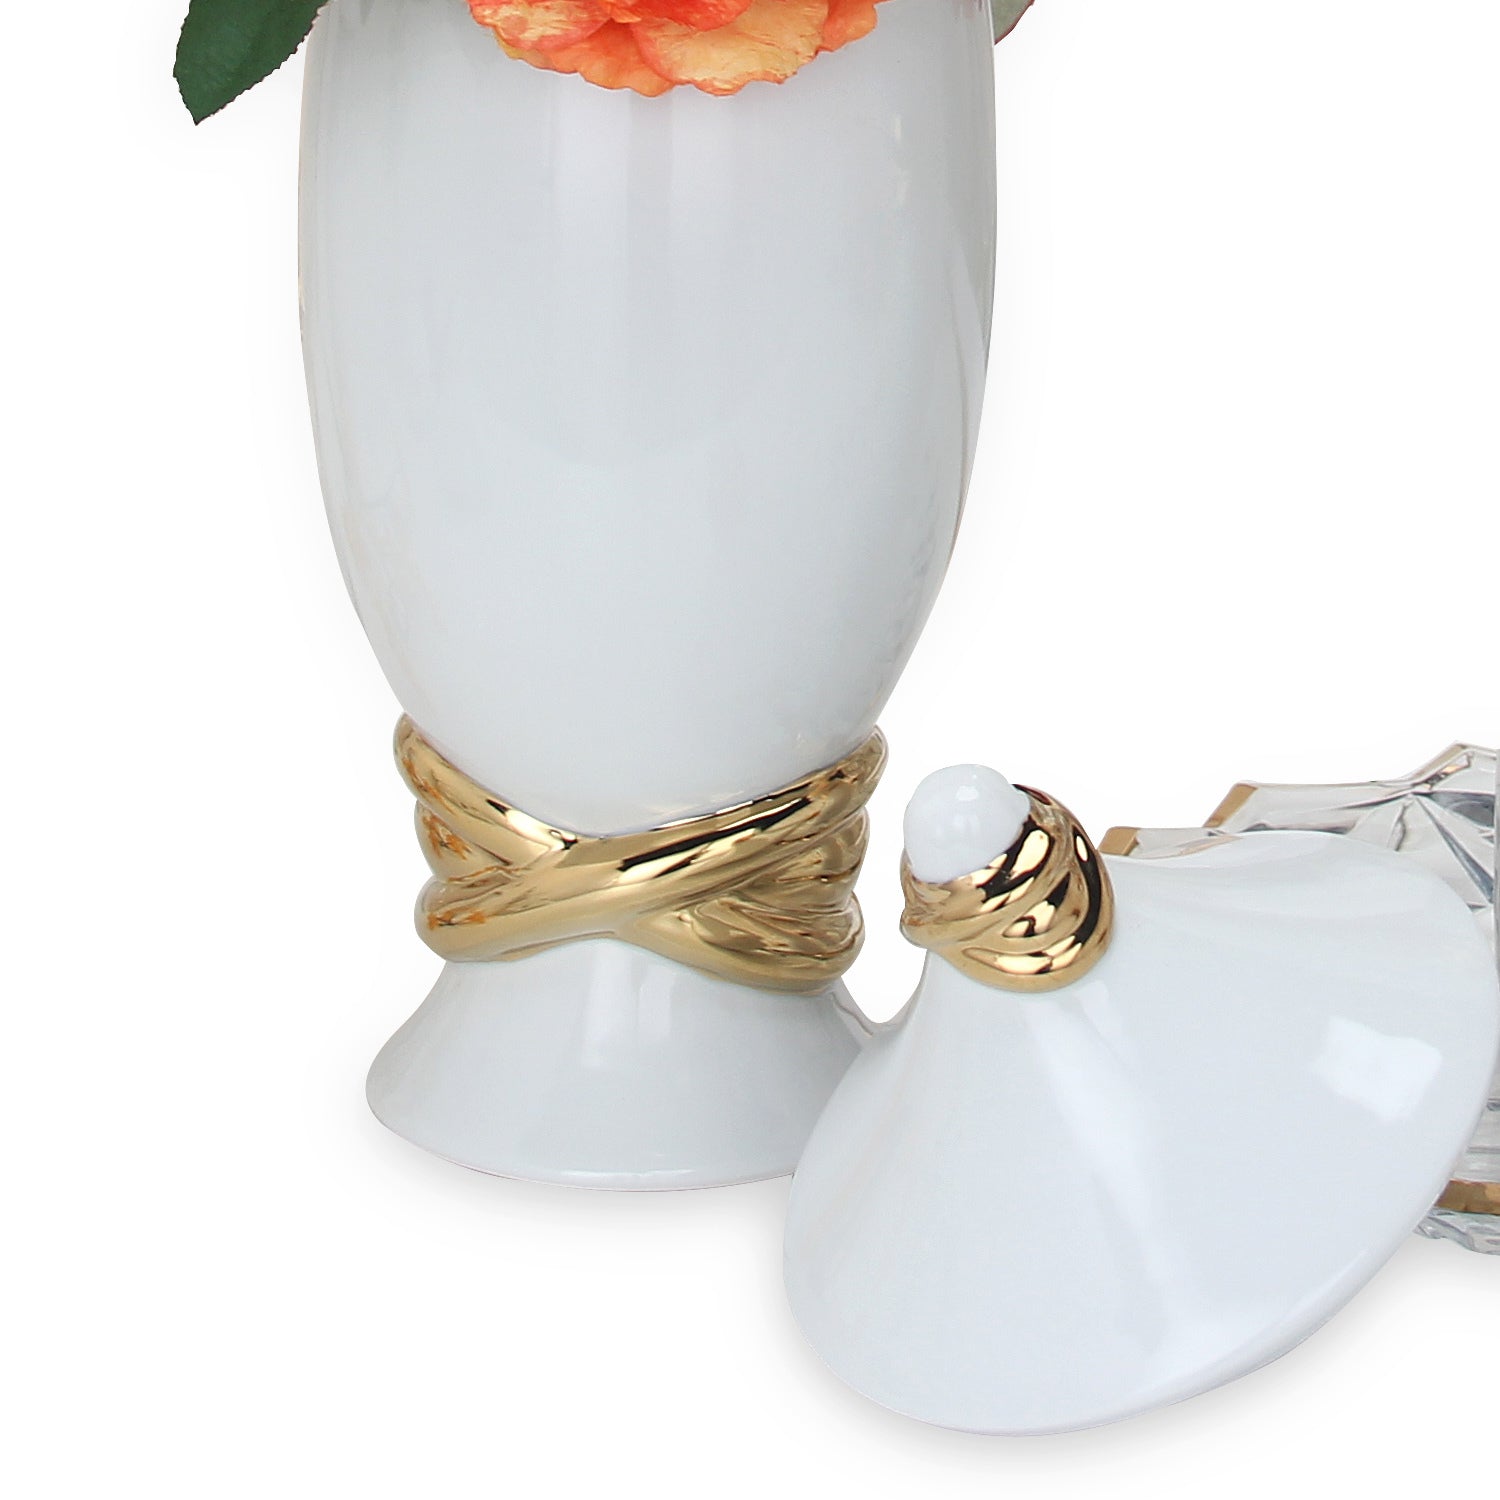 White Ceramic Decorative Jar with Gold Accent and Lid white-ceramic